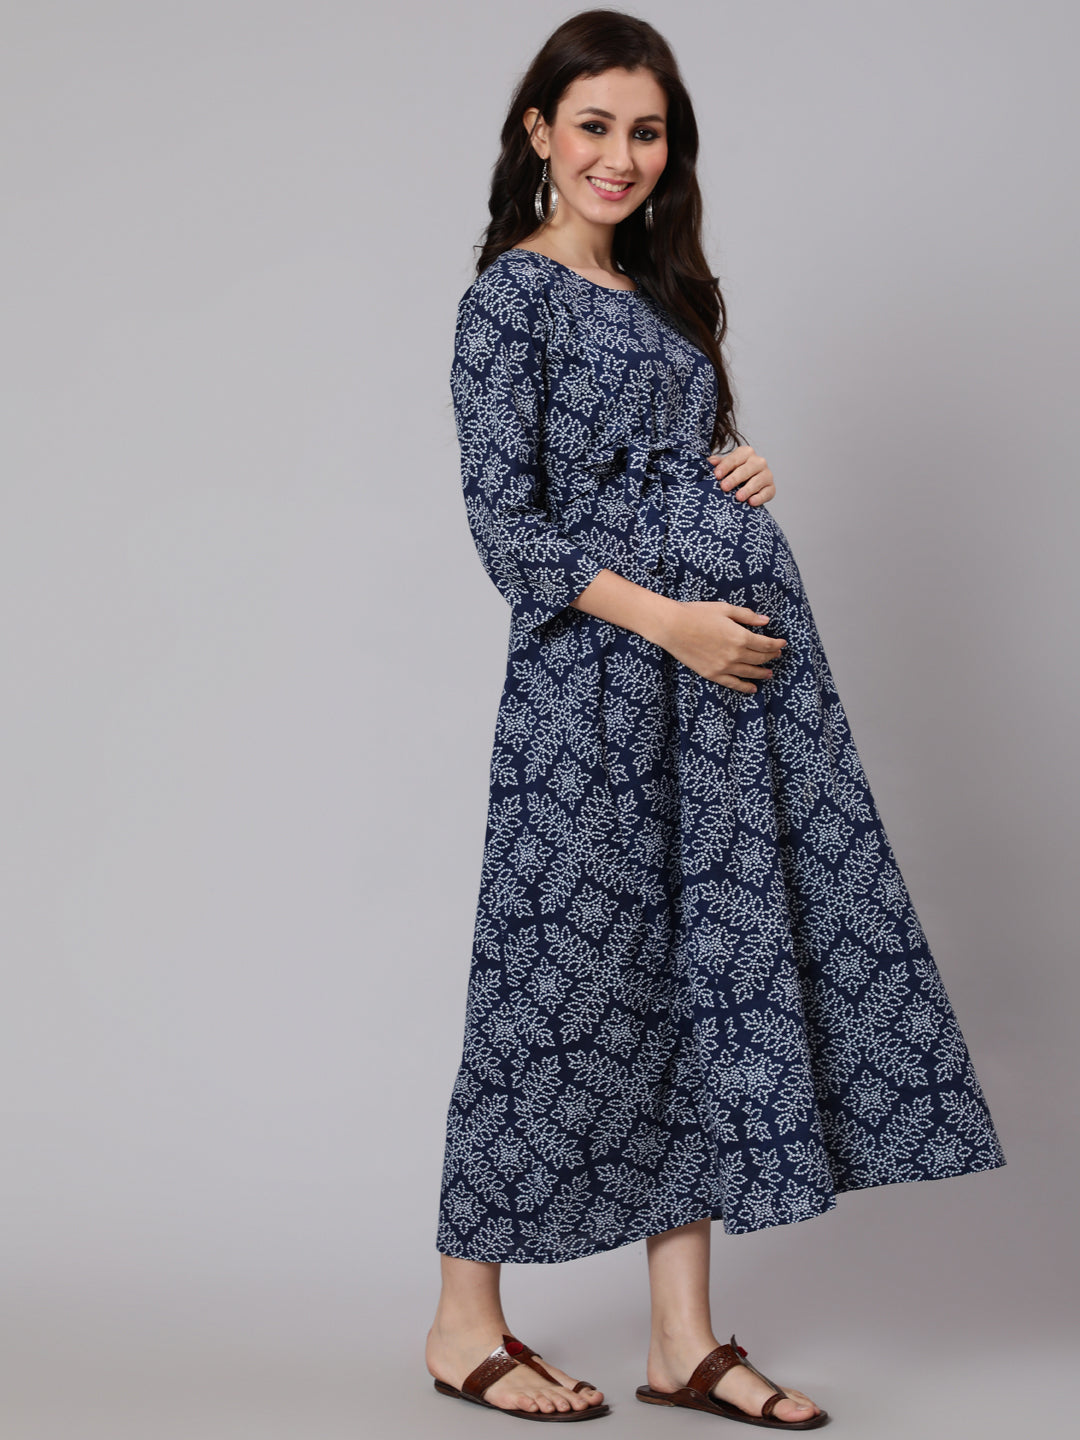 Maternity Cocktail Dresses OkayMom Pograph Props Pregnant Chiffon Lace Dress  For Po Shoot Pregnancy Wear Long Evening Party Clothing From Huoyineji,  $39.43 | DHgate.Com